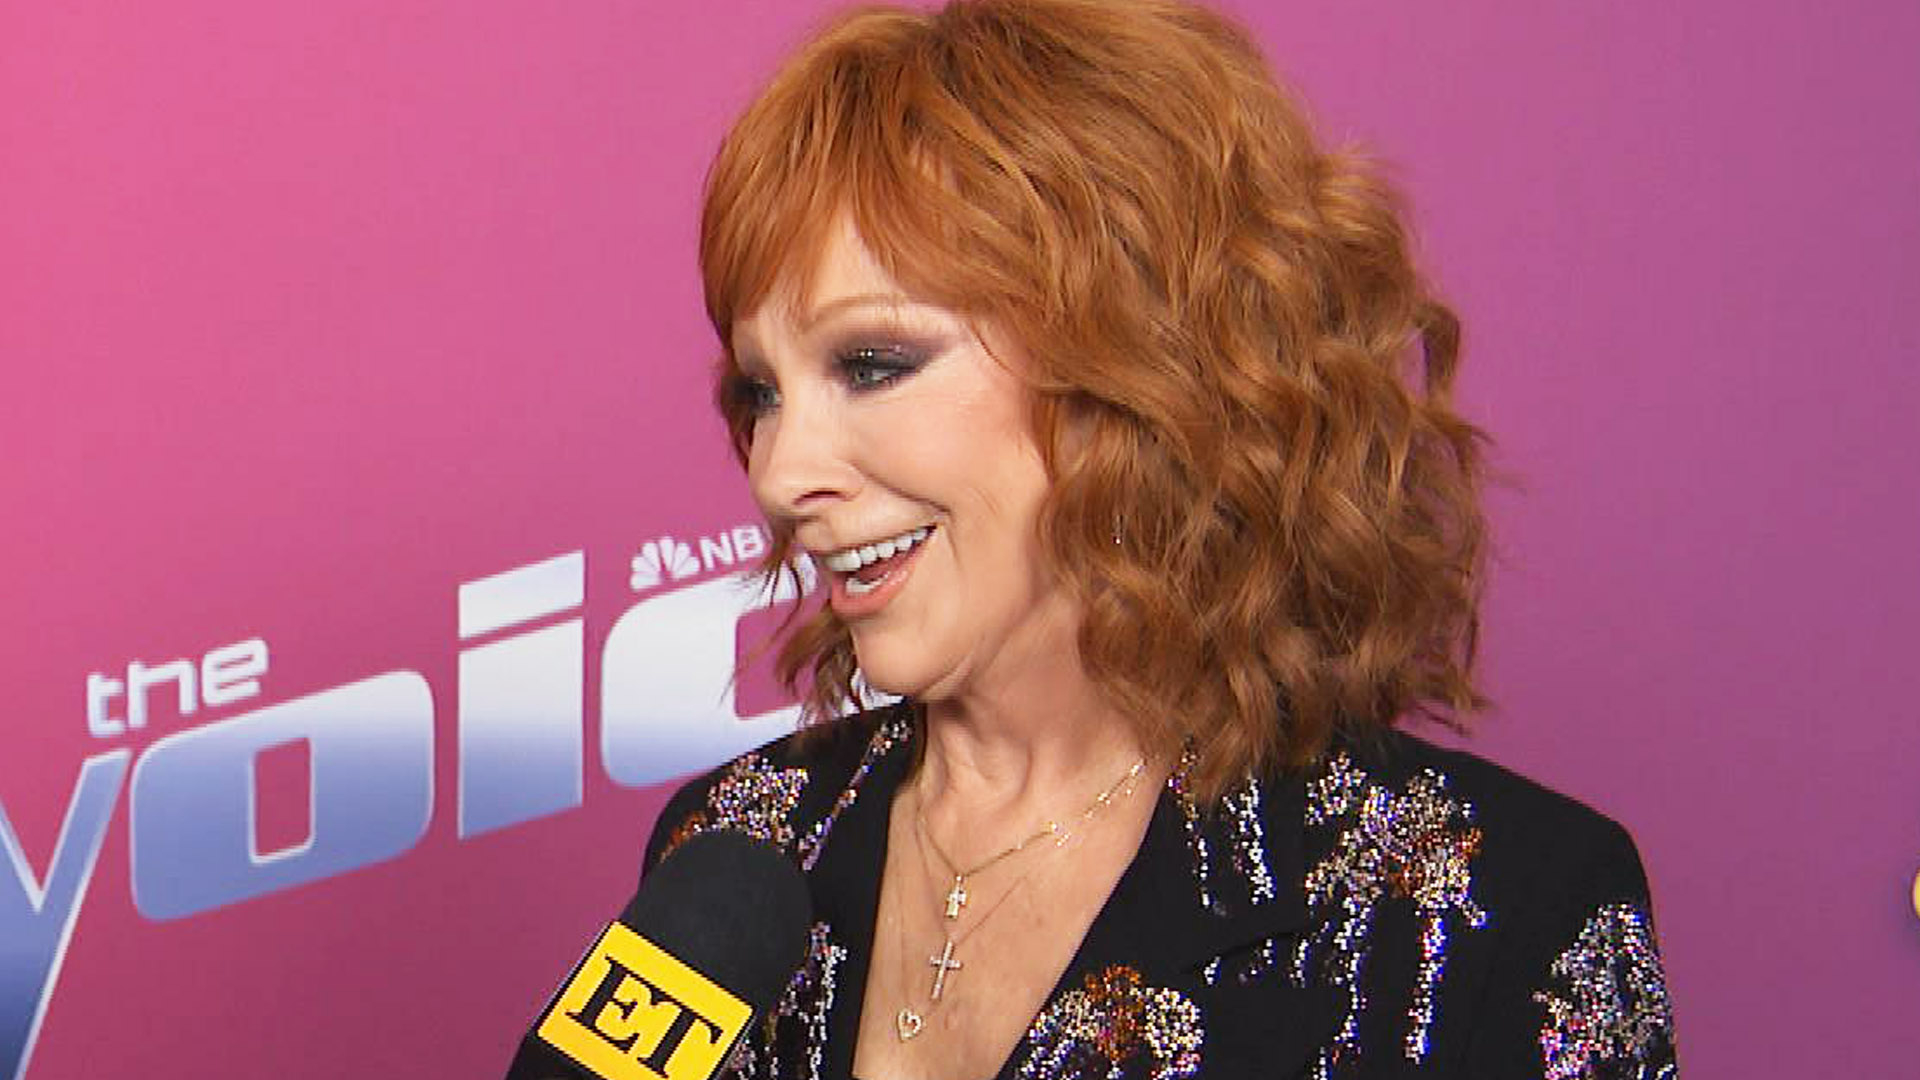 Reba McEntire Tearfully Welcomes Lainey Wilson Into the Grand Ole Opry on 'The Voice' Finale | Entertainment Tonight